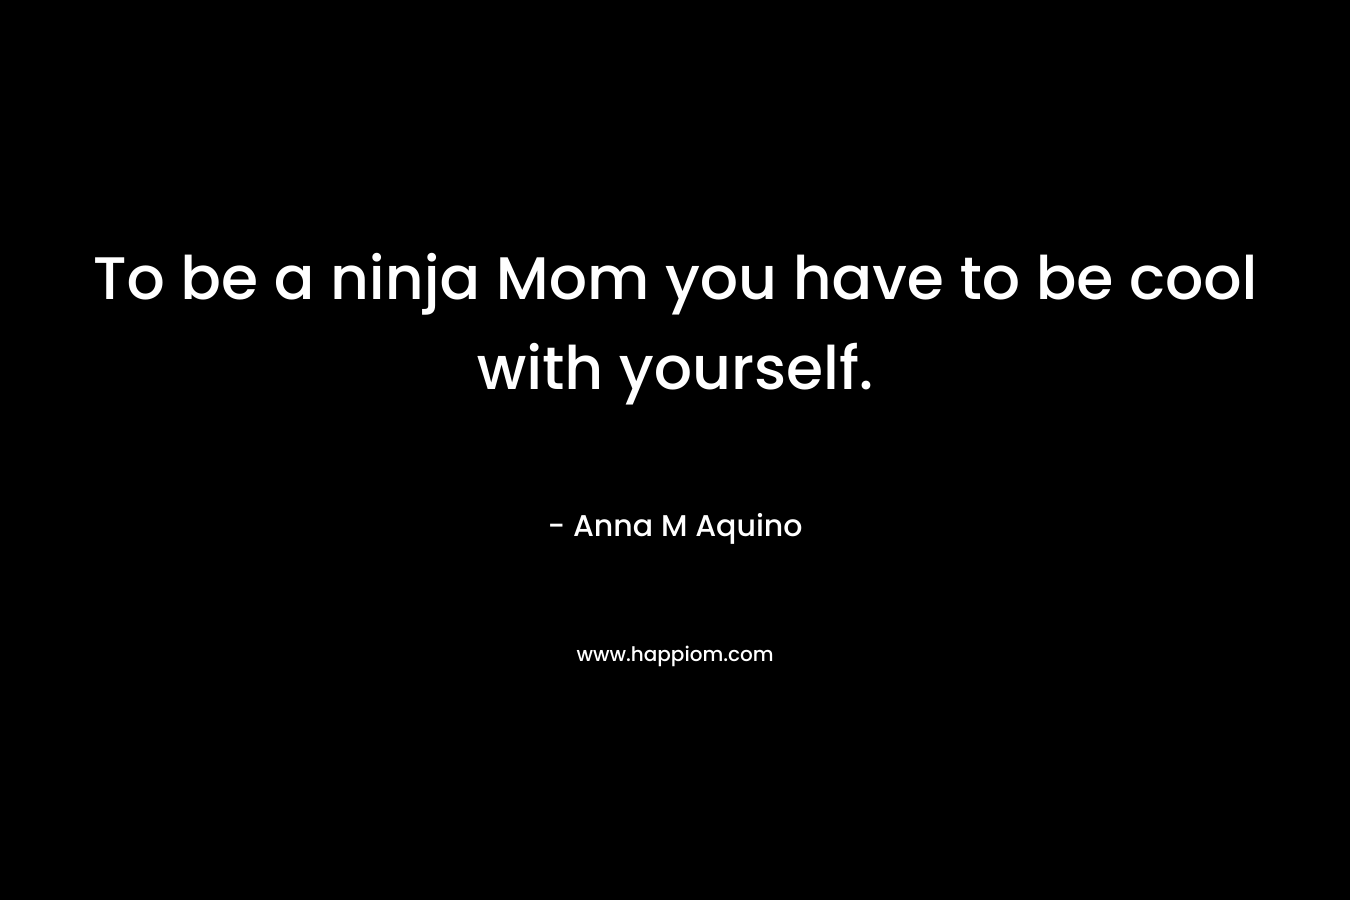 To be a ninja Mom you have to be cool with yourself.